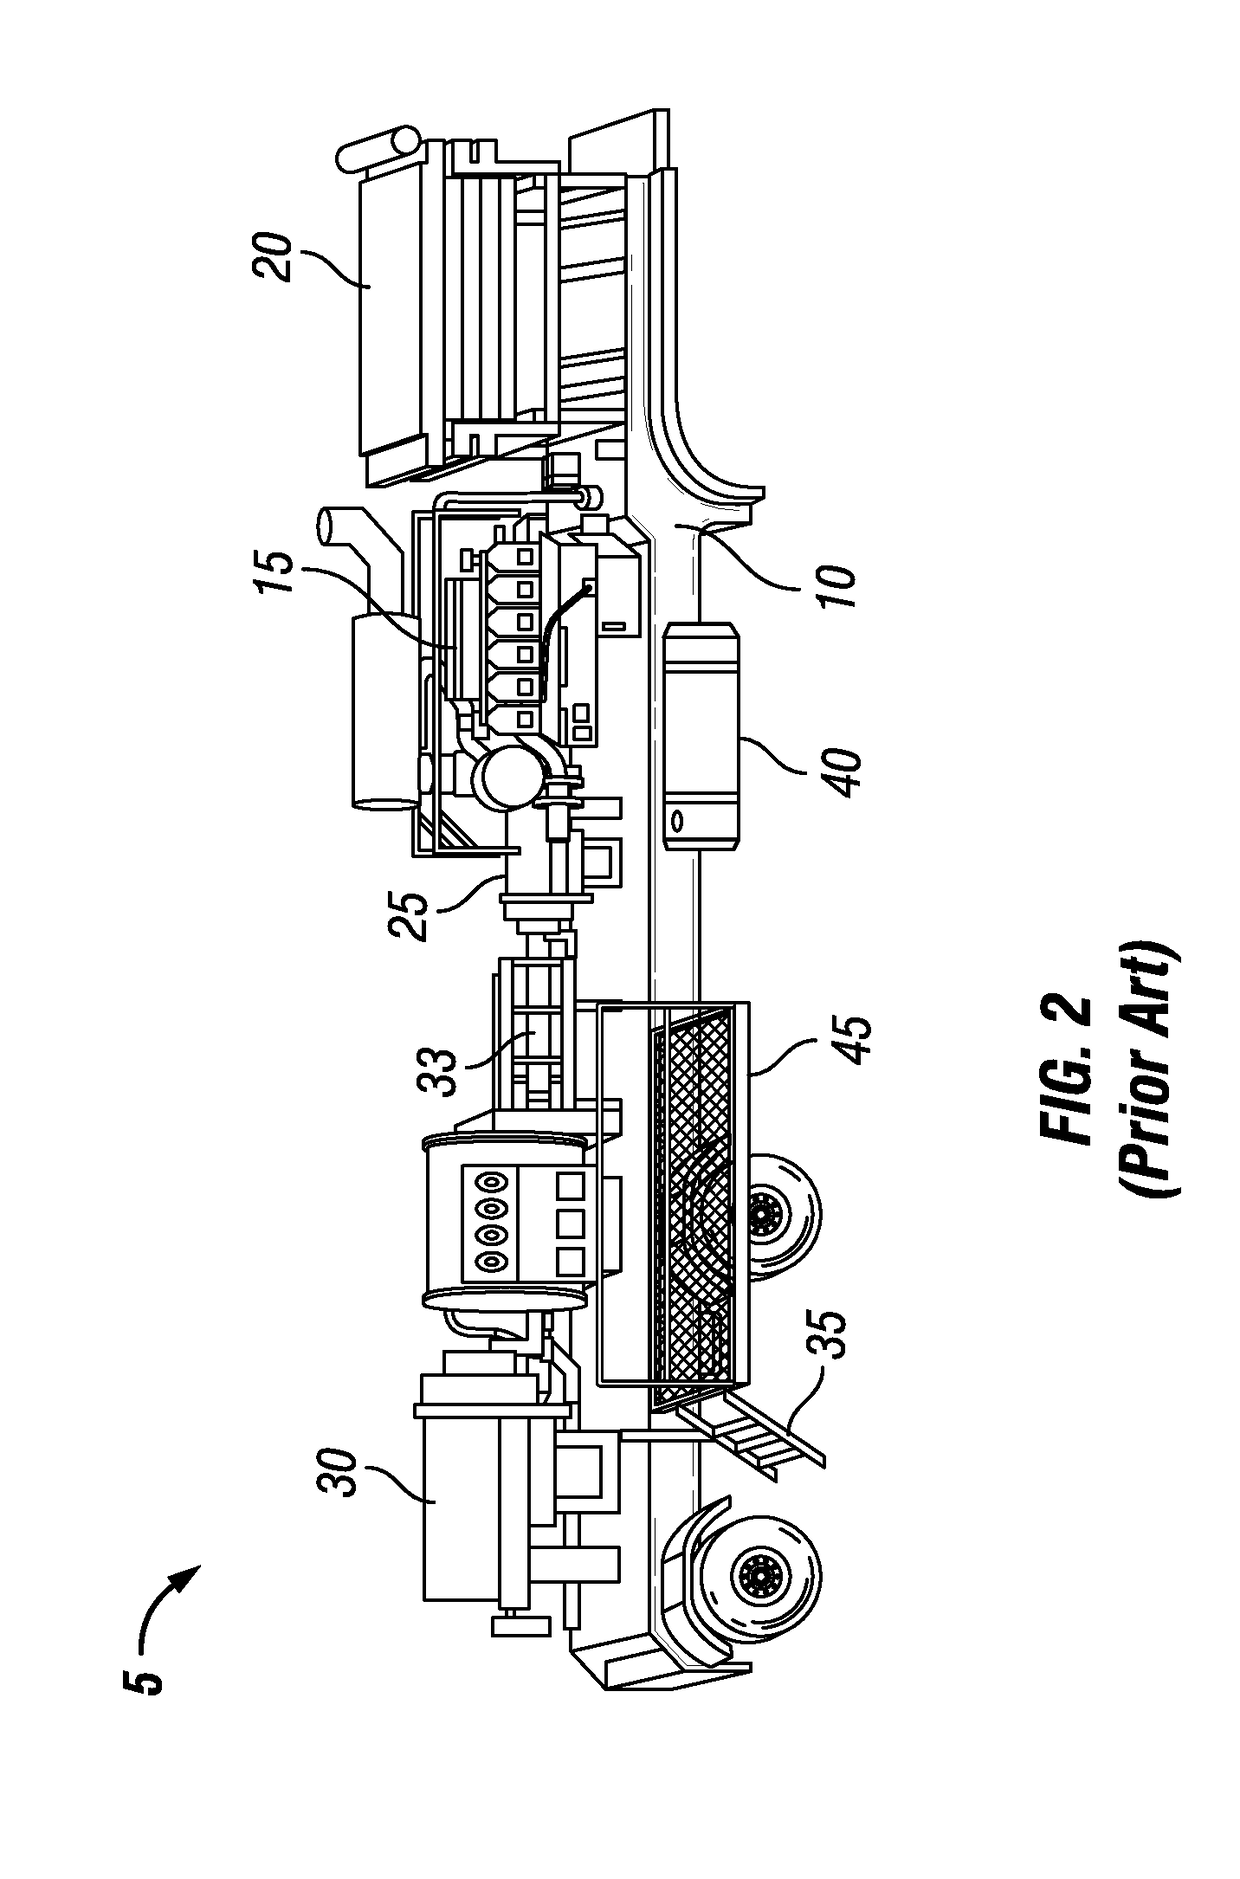 Equipment, system and method for delivery of high pressure fluid